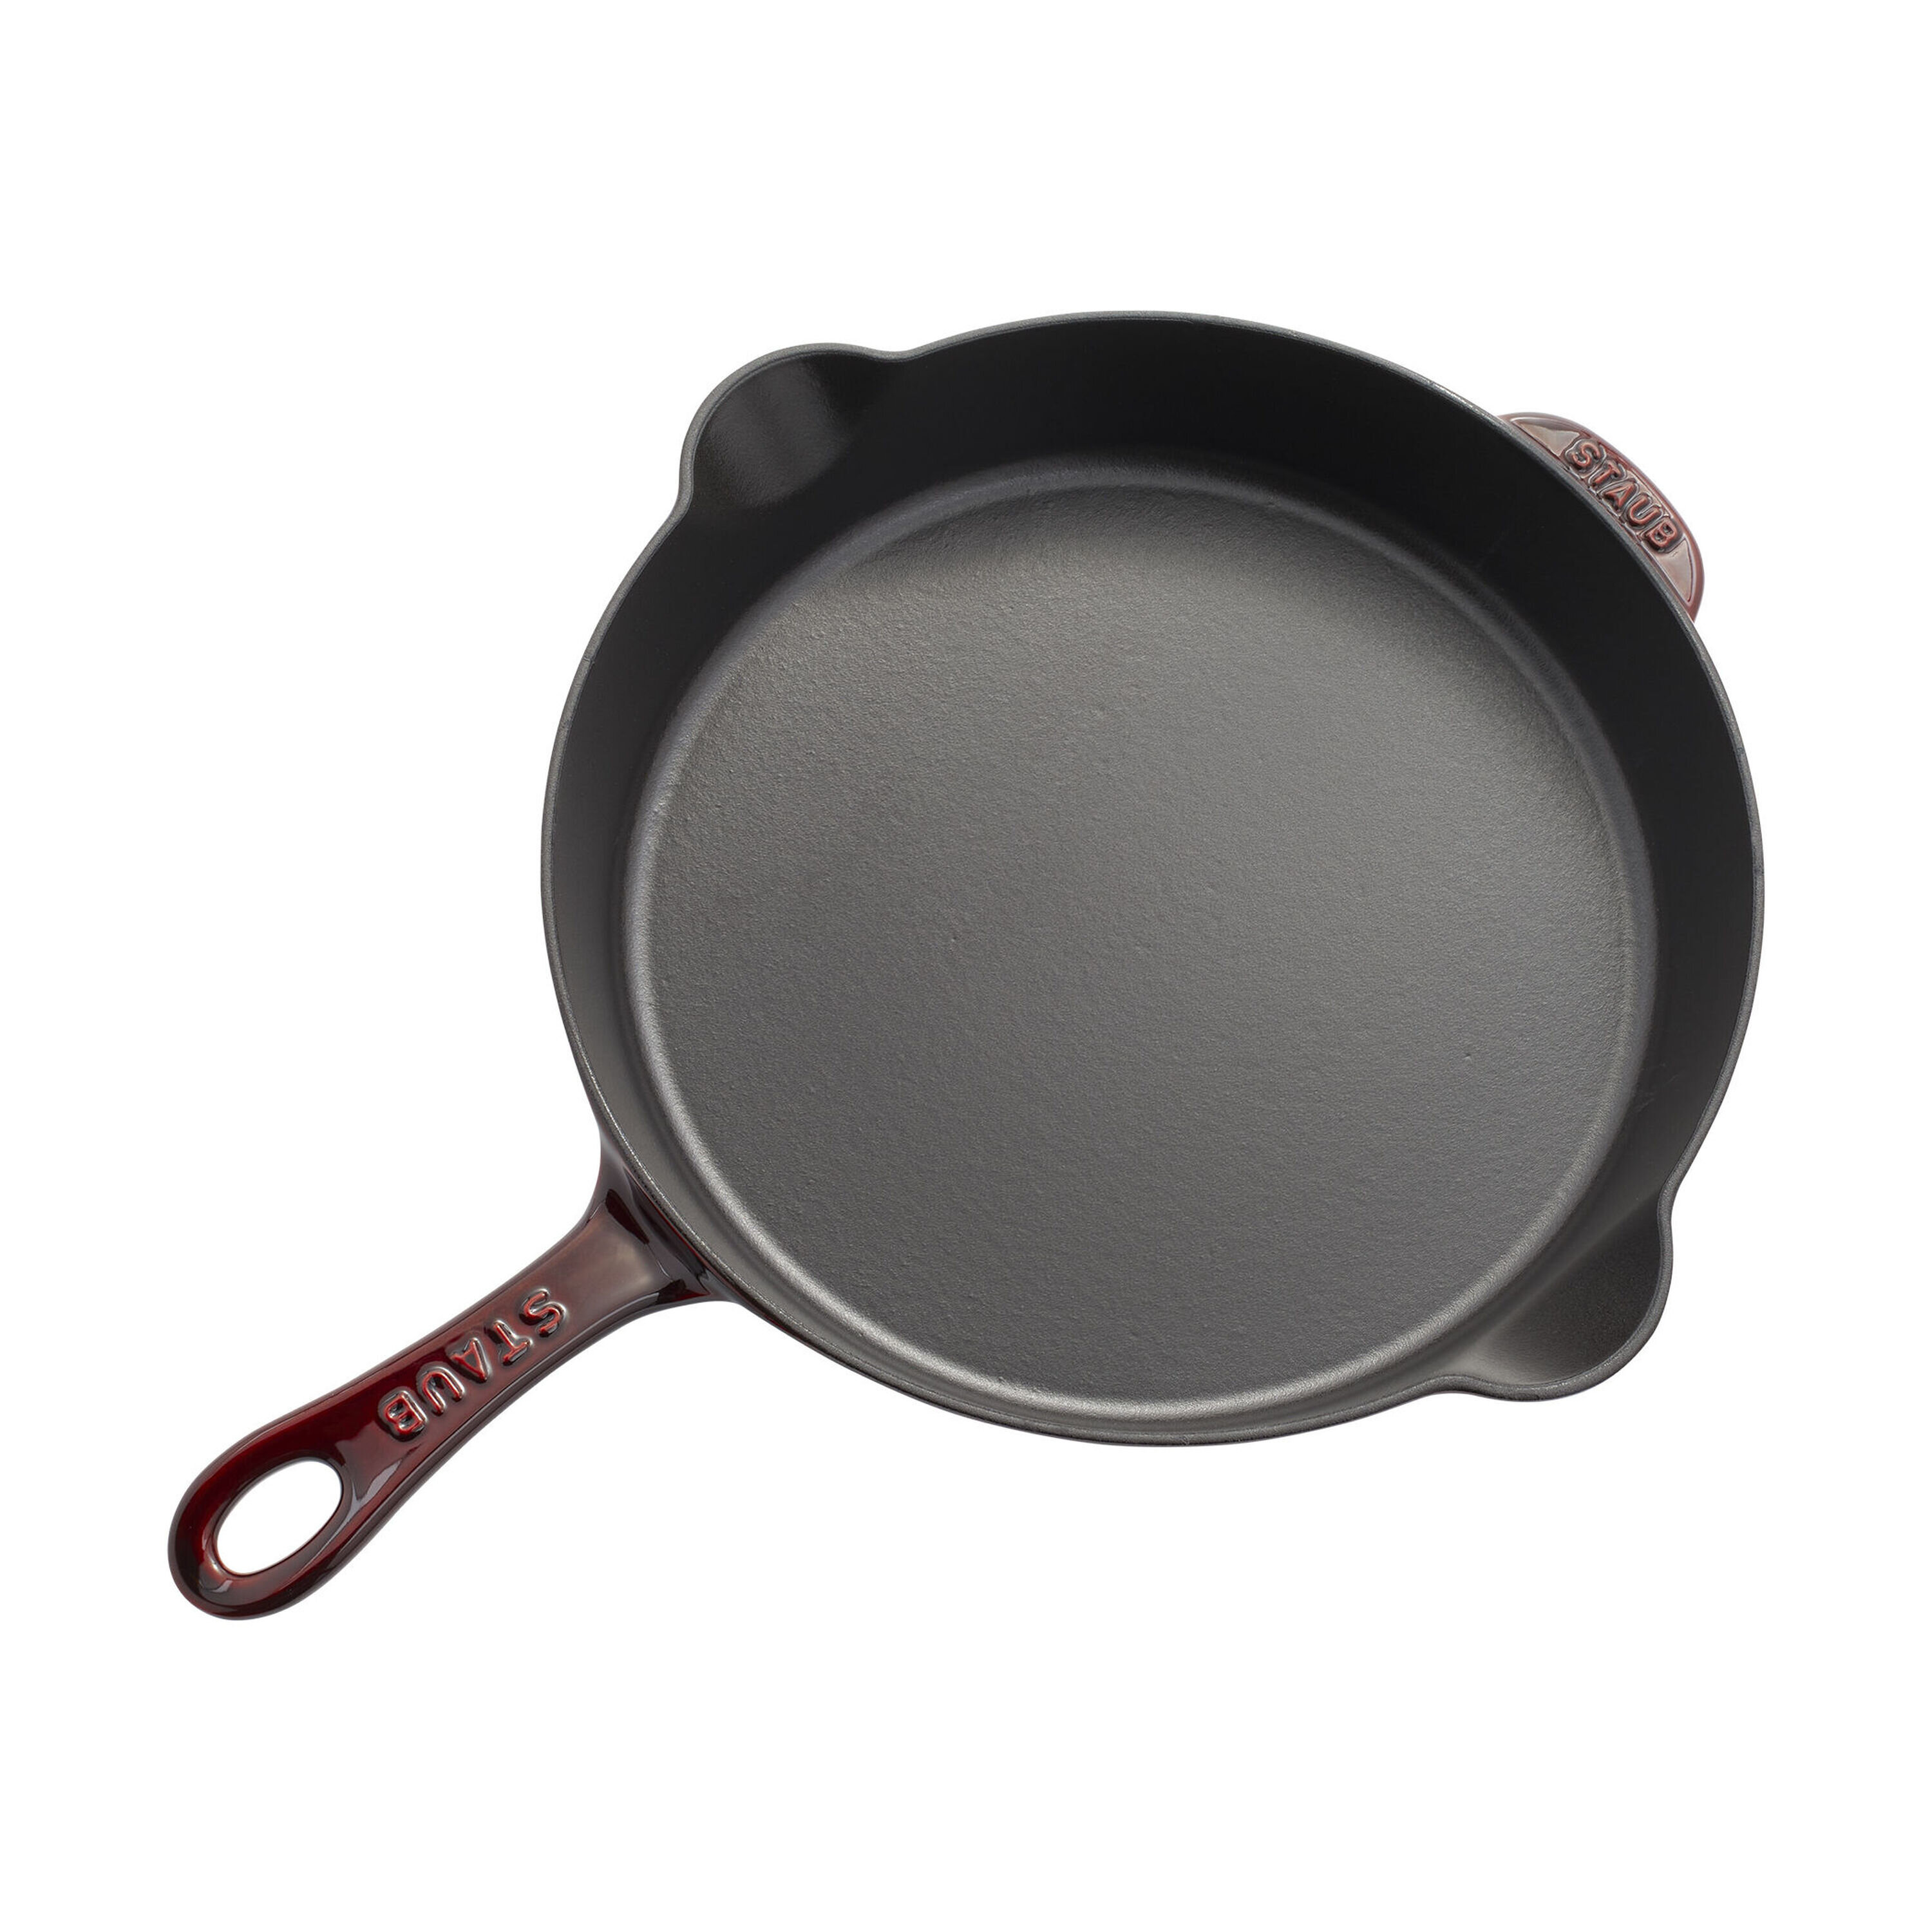  Staub Cast Iron 12-inch Fry Pan - Grenadine, Made in France :  Home & Kitchen